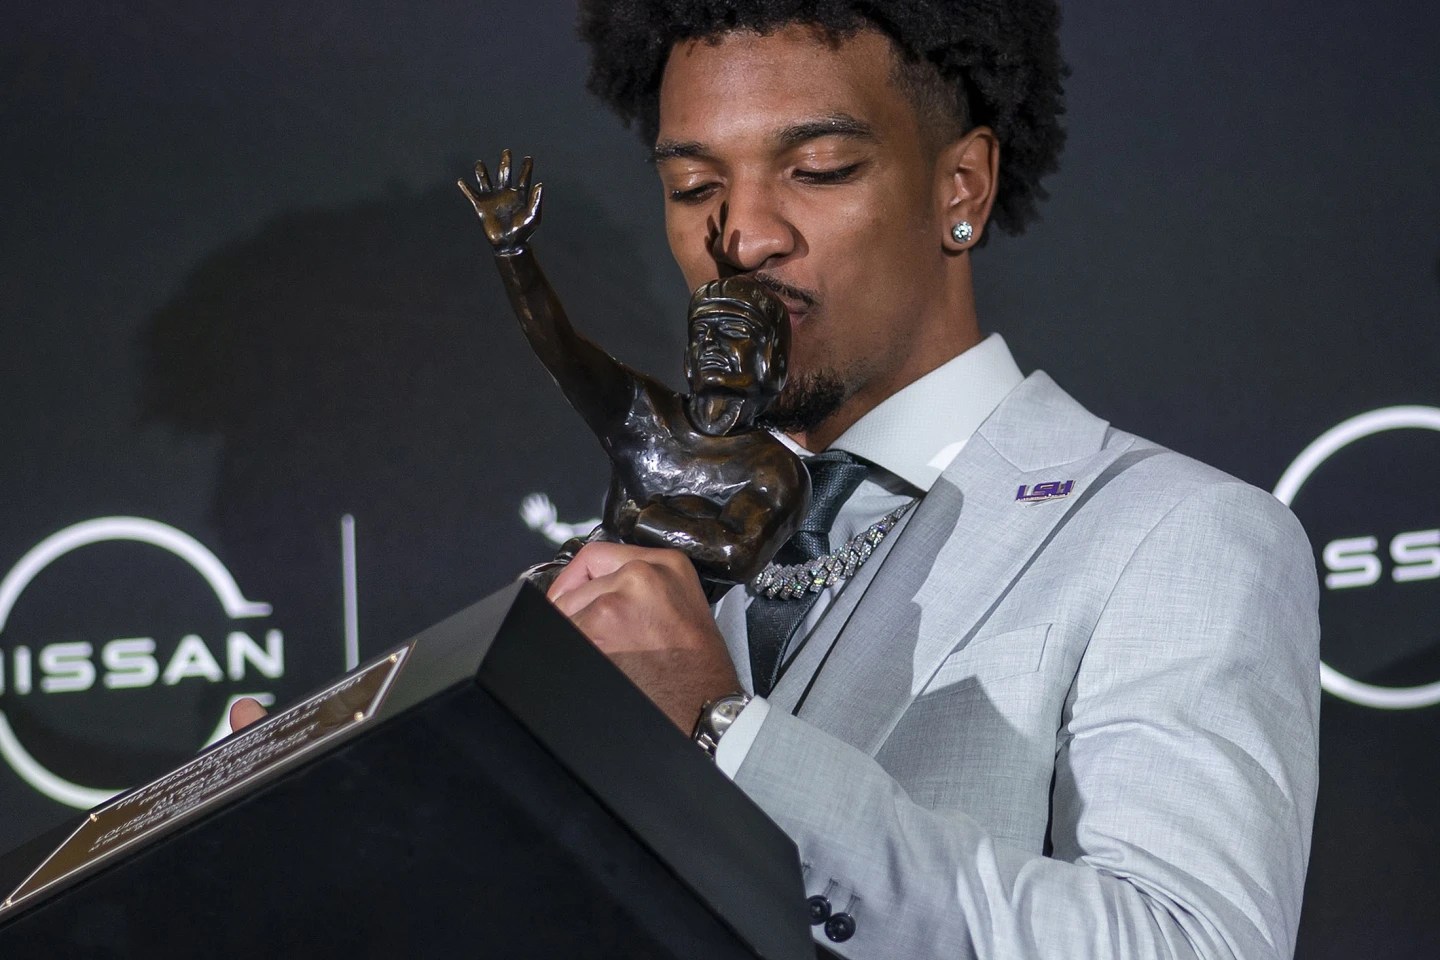 LSU QB Jayden Daniels overcomes being out of playoff hunt to win Heisman Trophy with prolific season